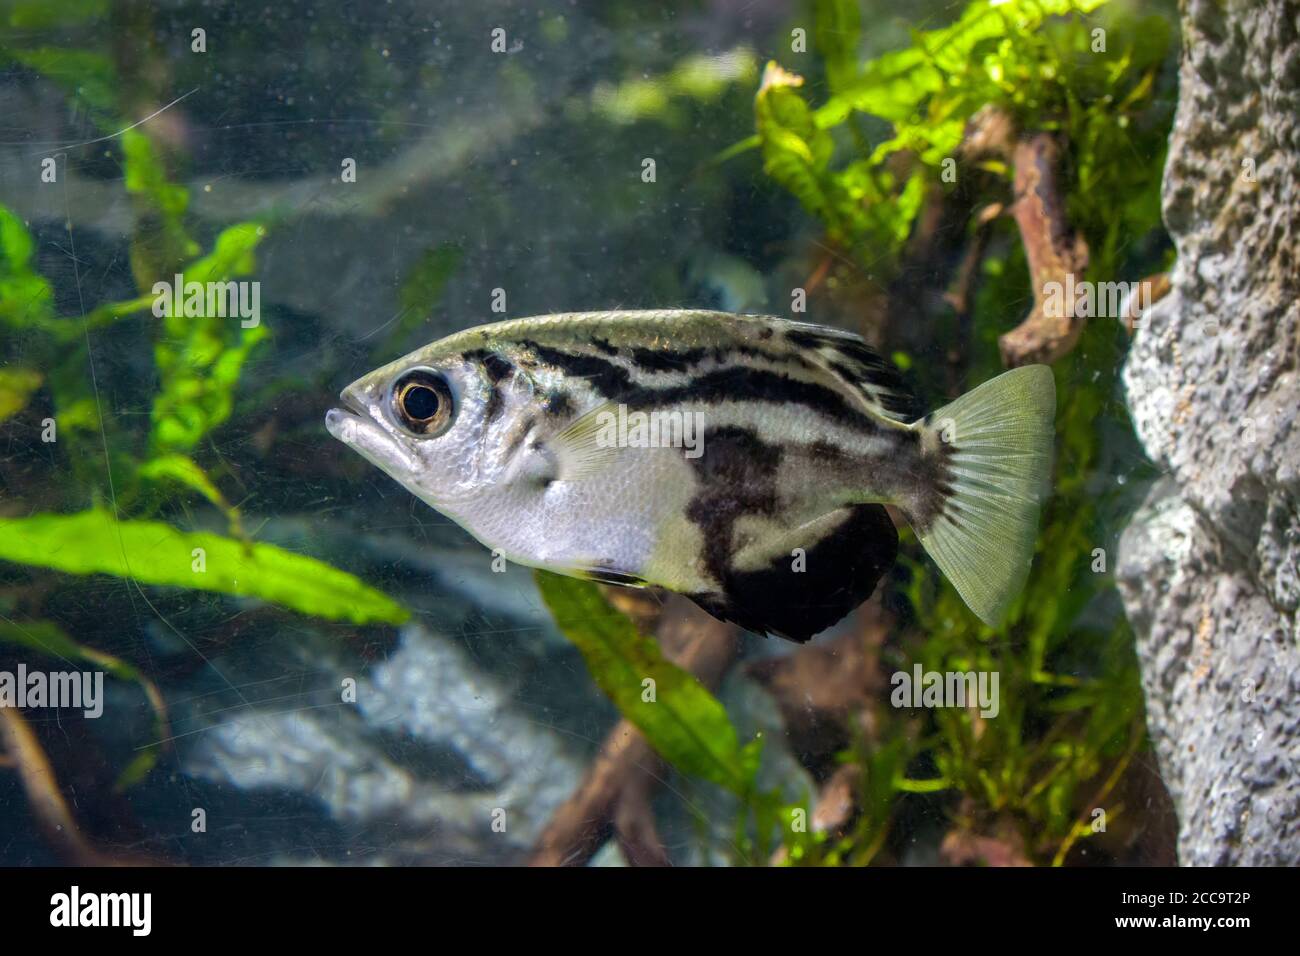 The clouded archerfish (Toxotes blythii) is a perciform fish of genus Toxotes. It is found in rivers and estuaries in Myanmar. Stock Photo